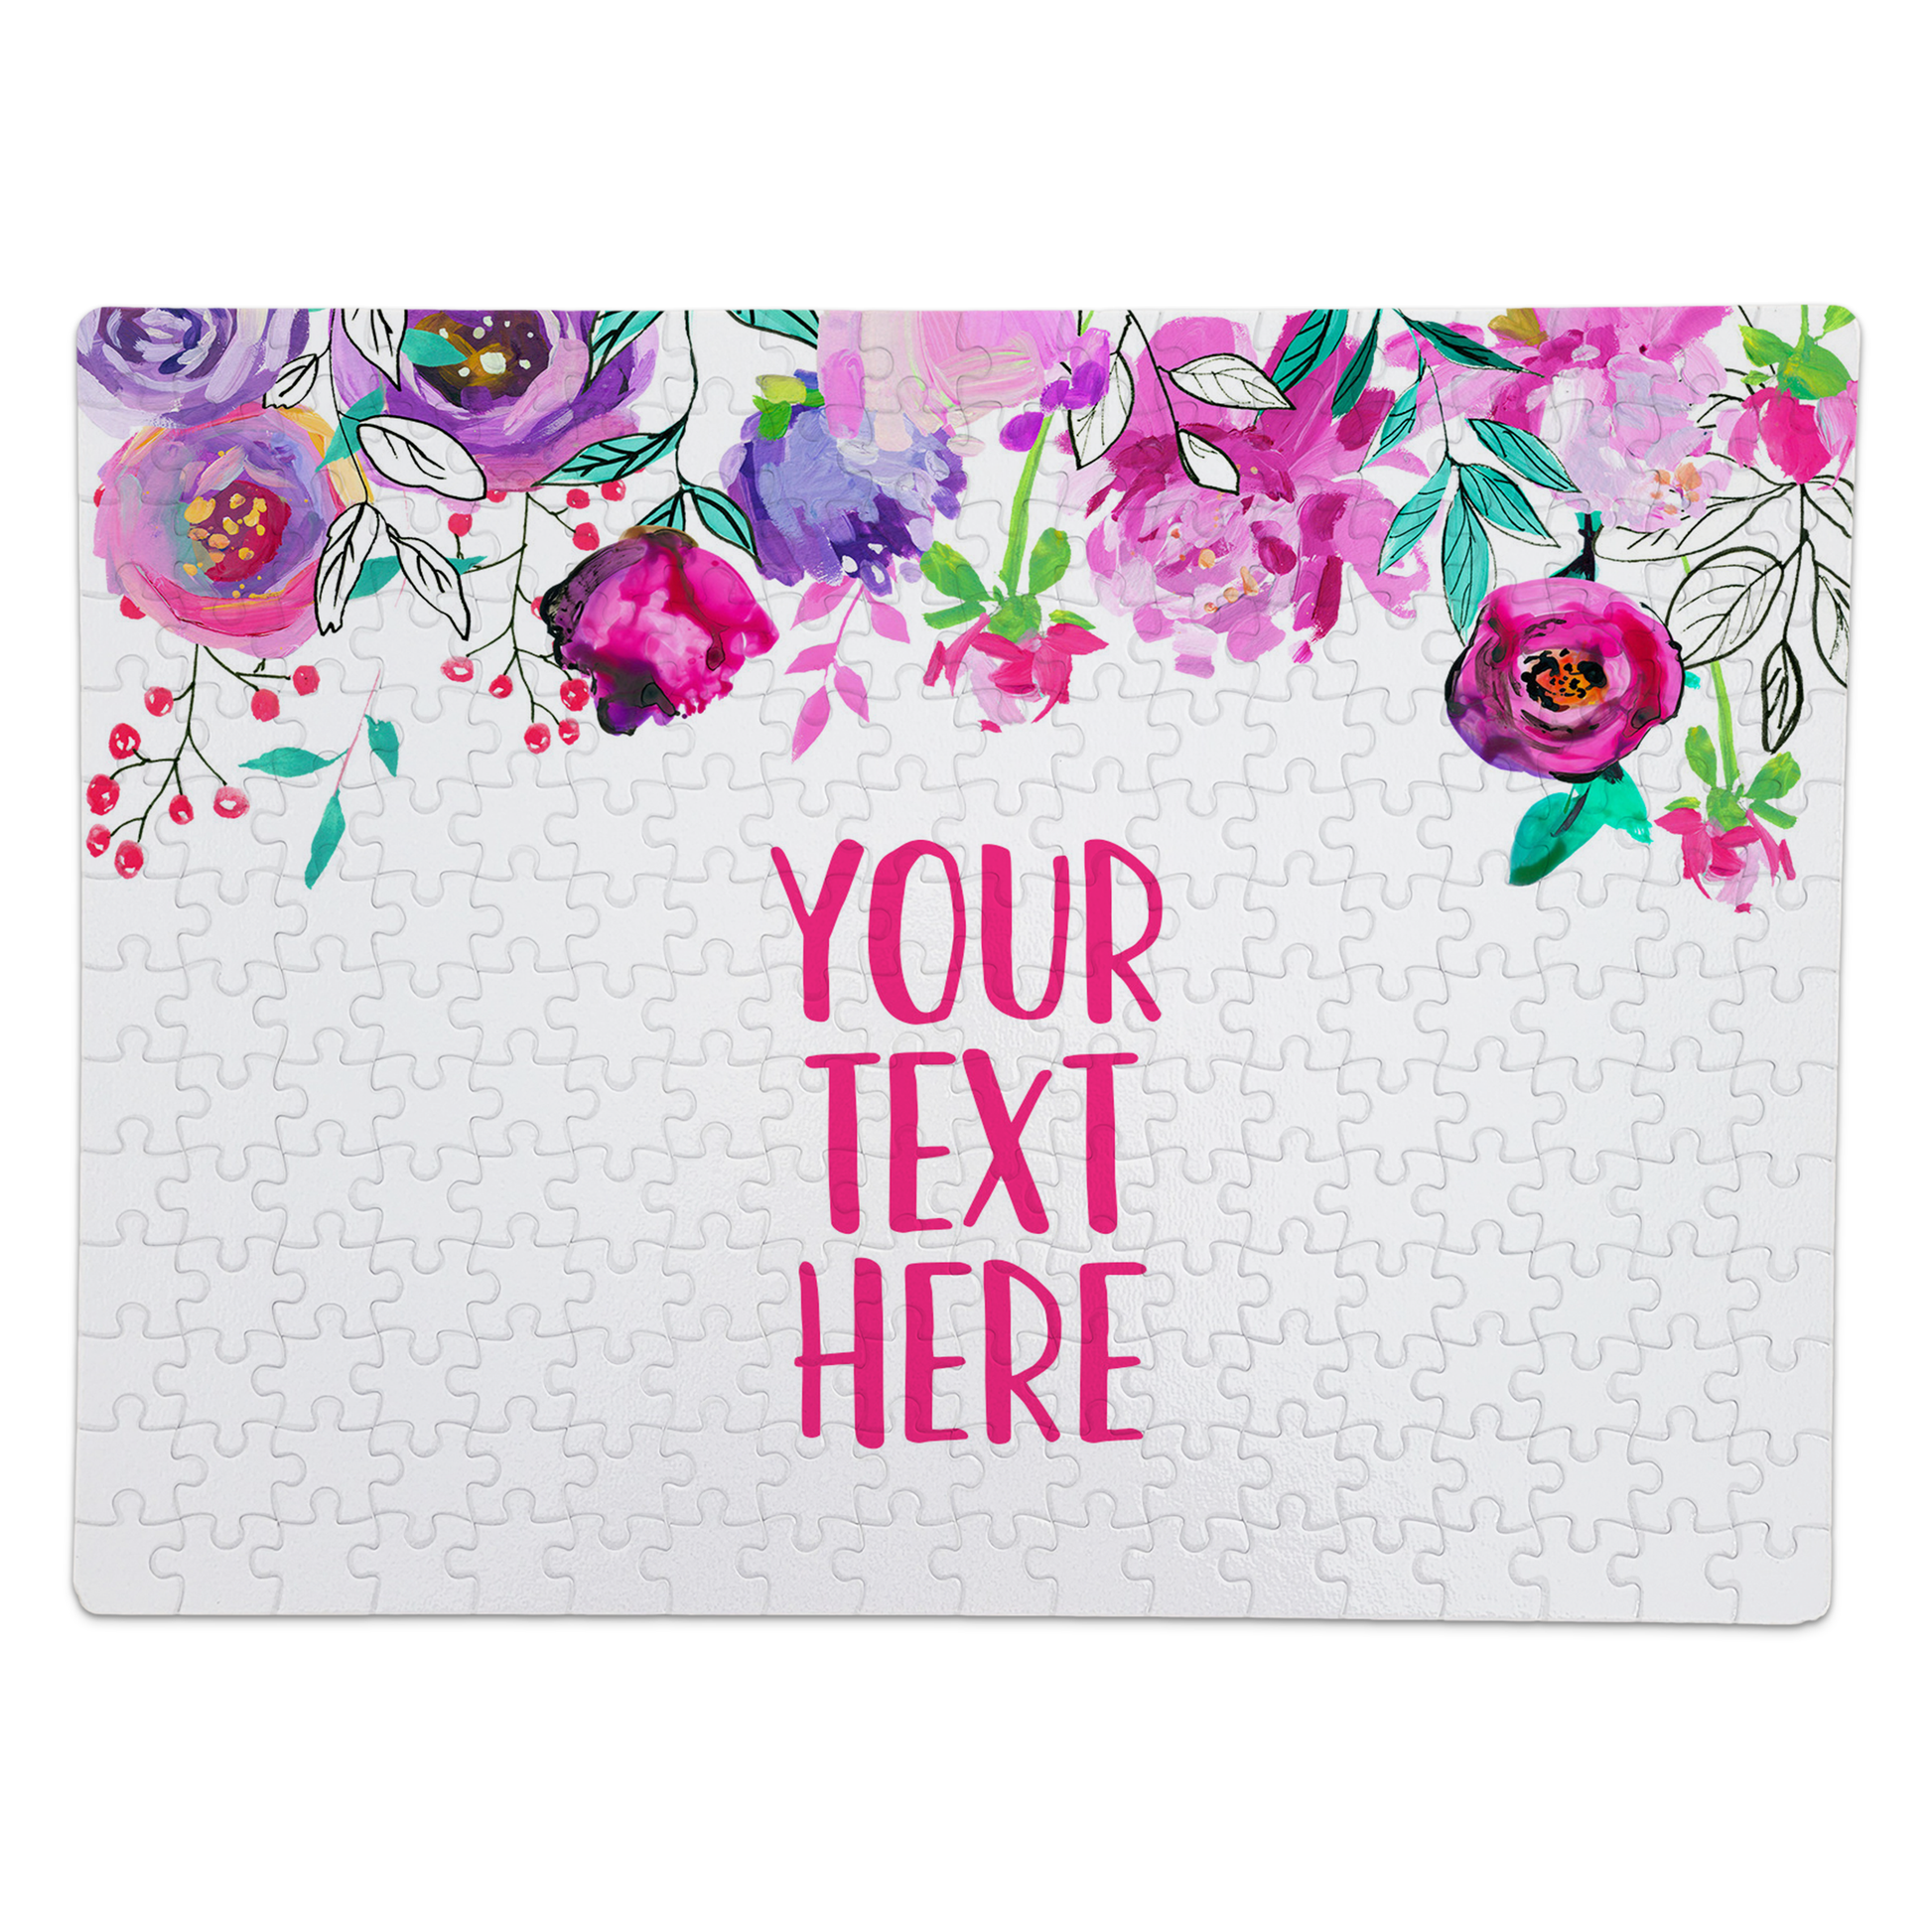 Create Your Own Puzzle - Floral Design - CYOP0151 | S'Berry Boutique